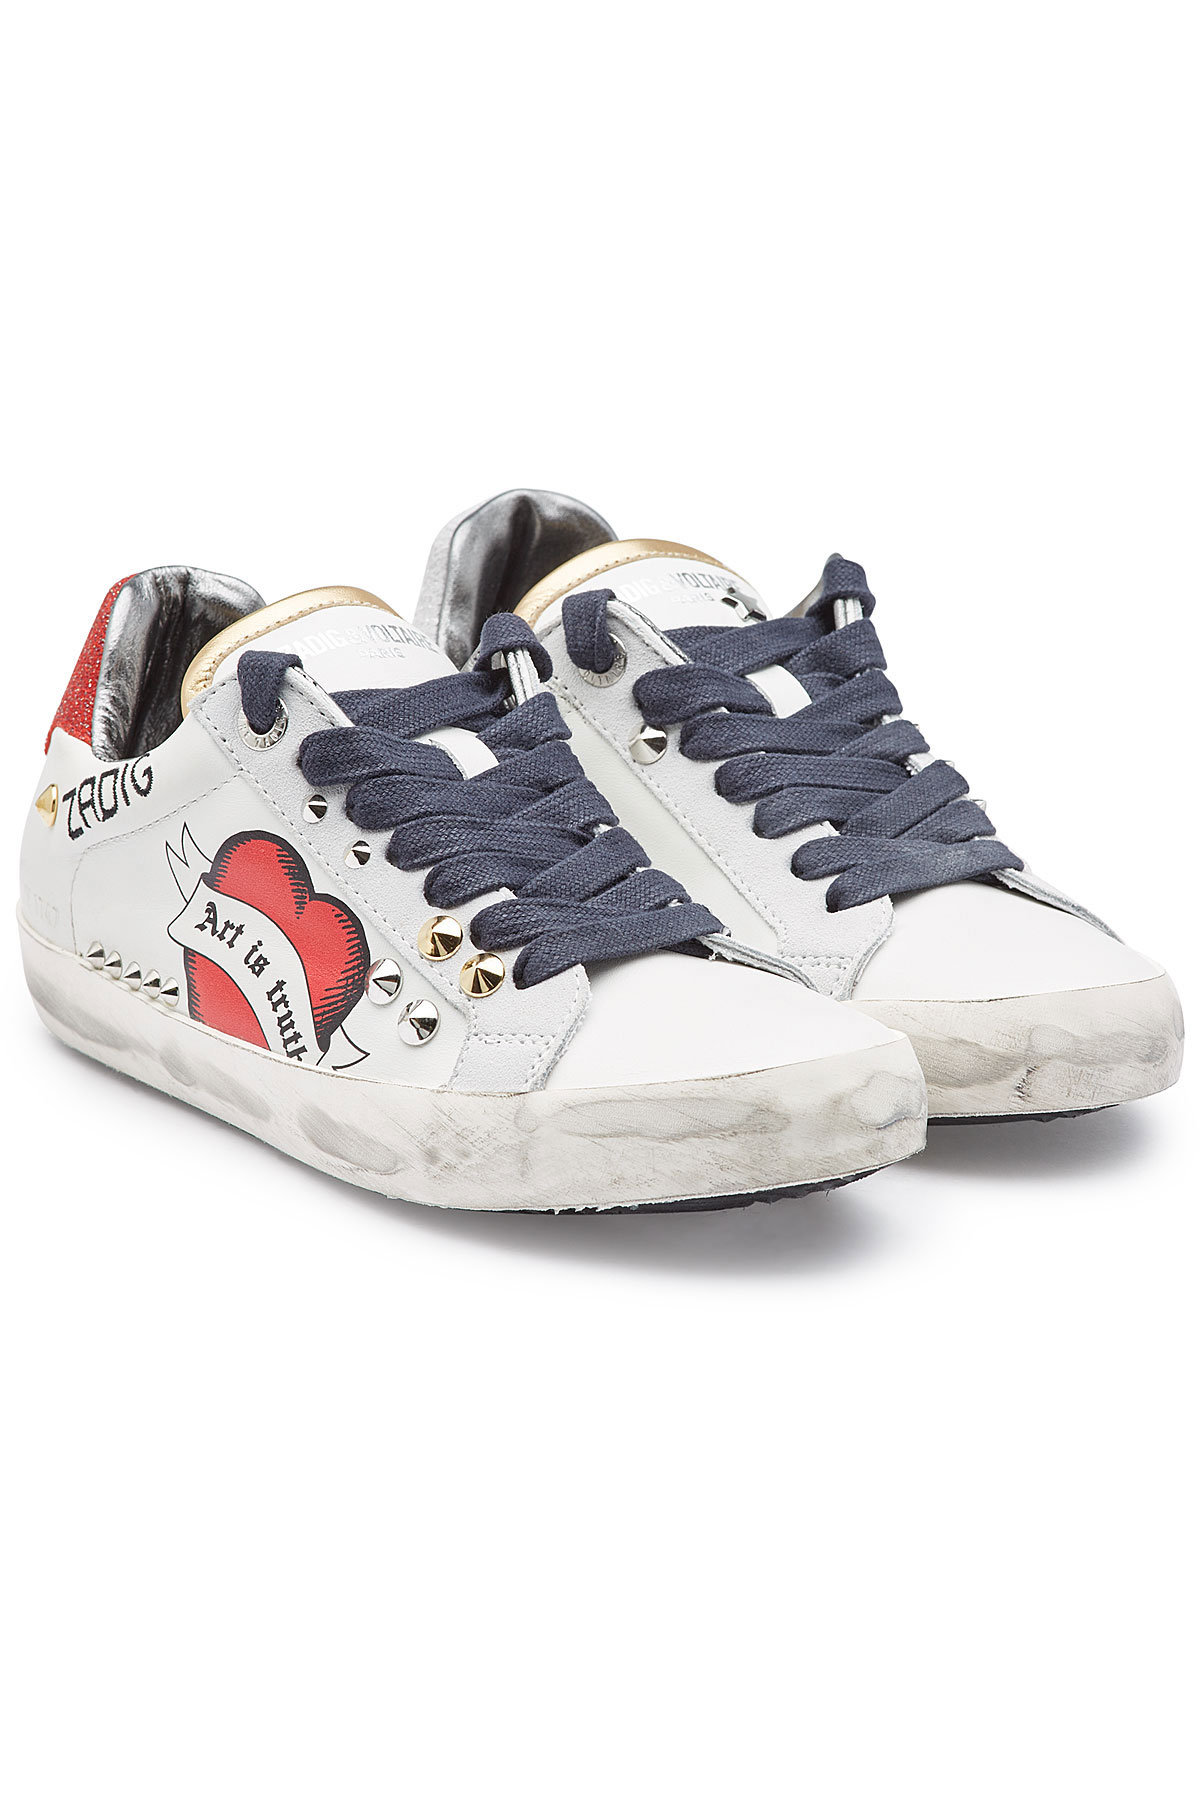 Zadig & Voltaire Distressed Leather Sneakers With Studs In White | ModeSens